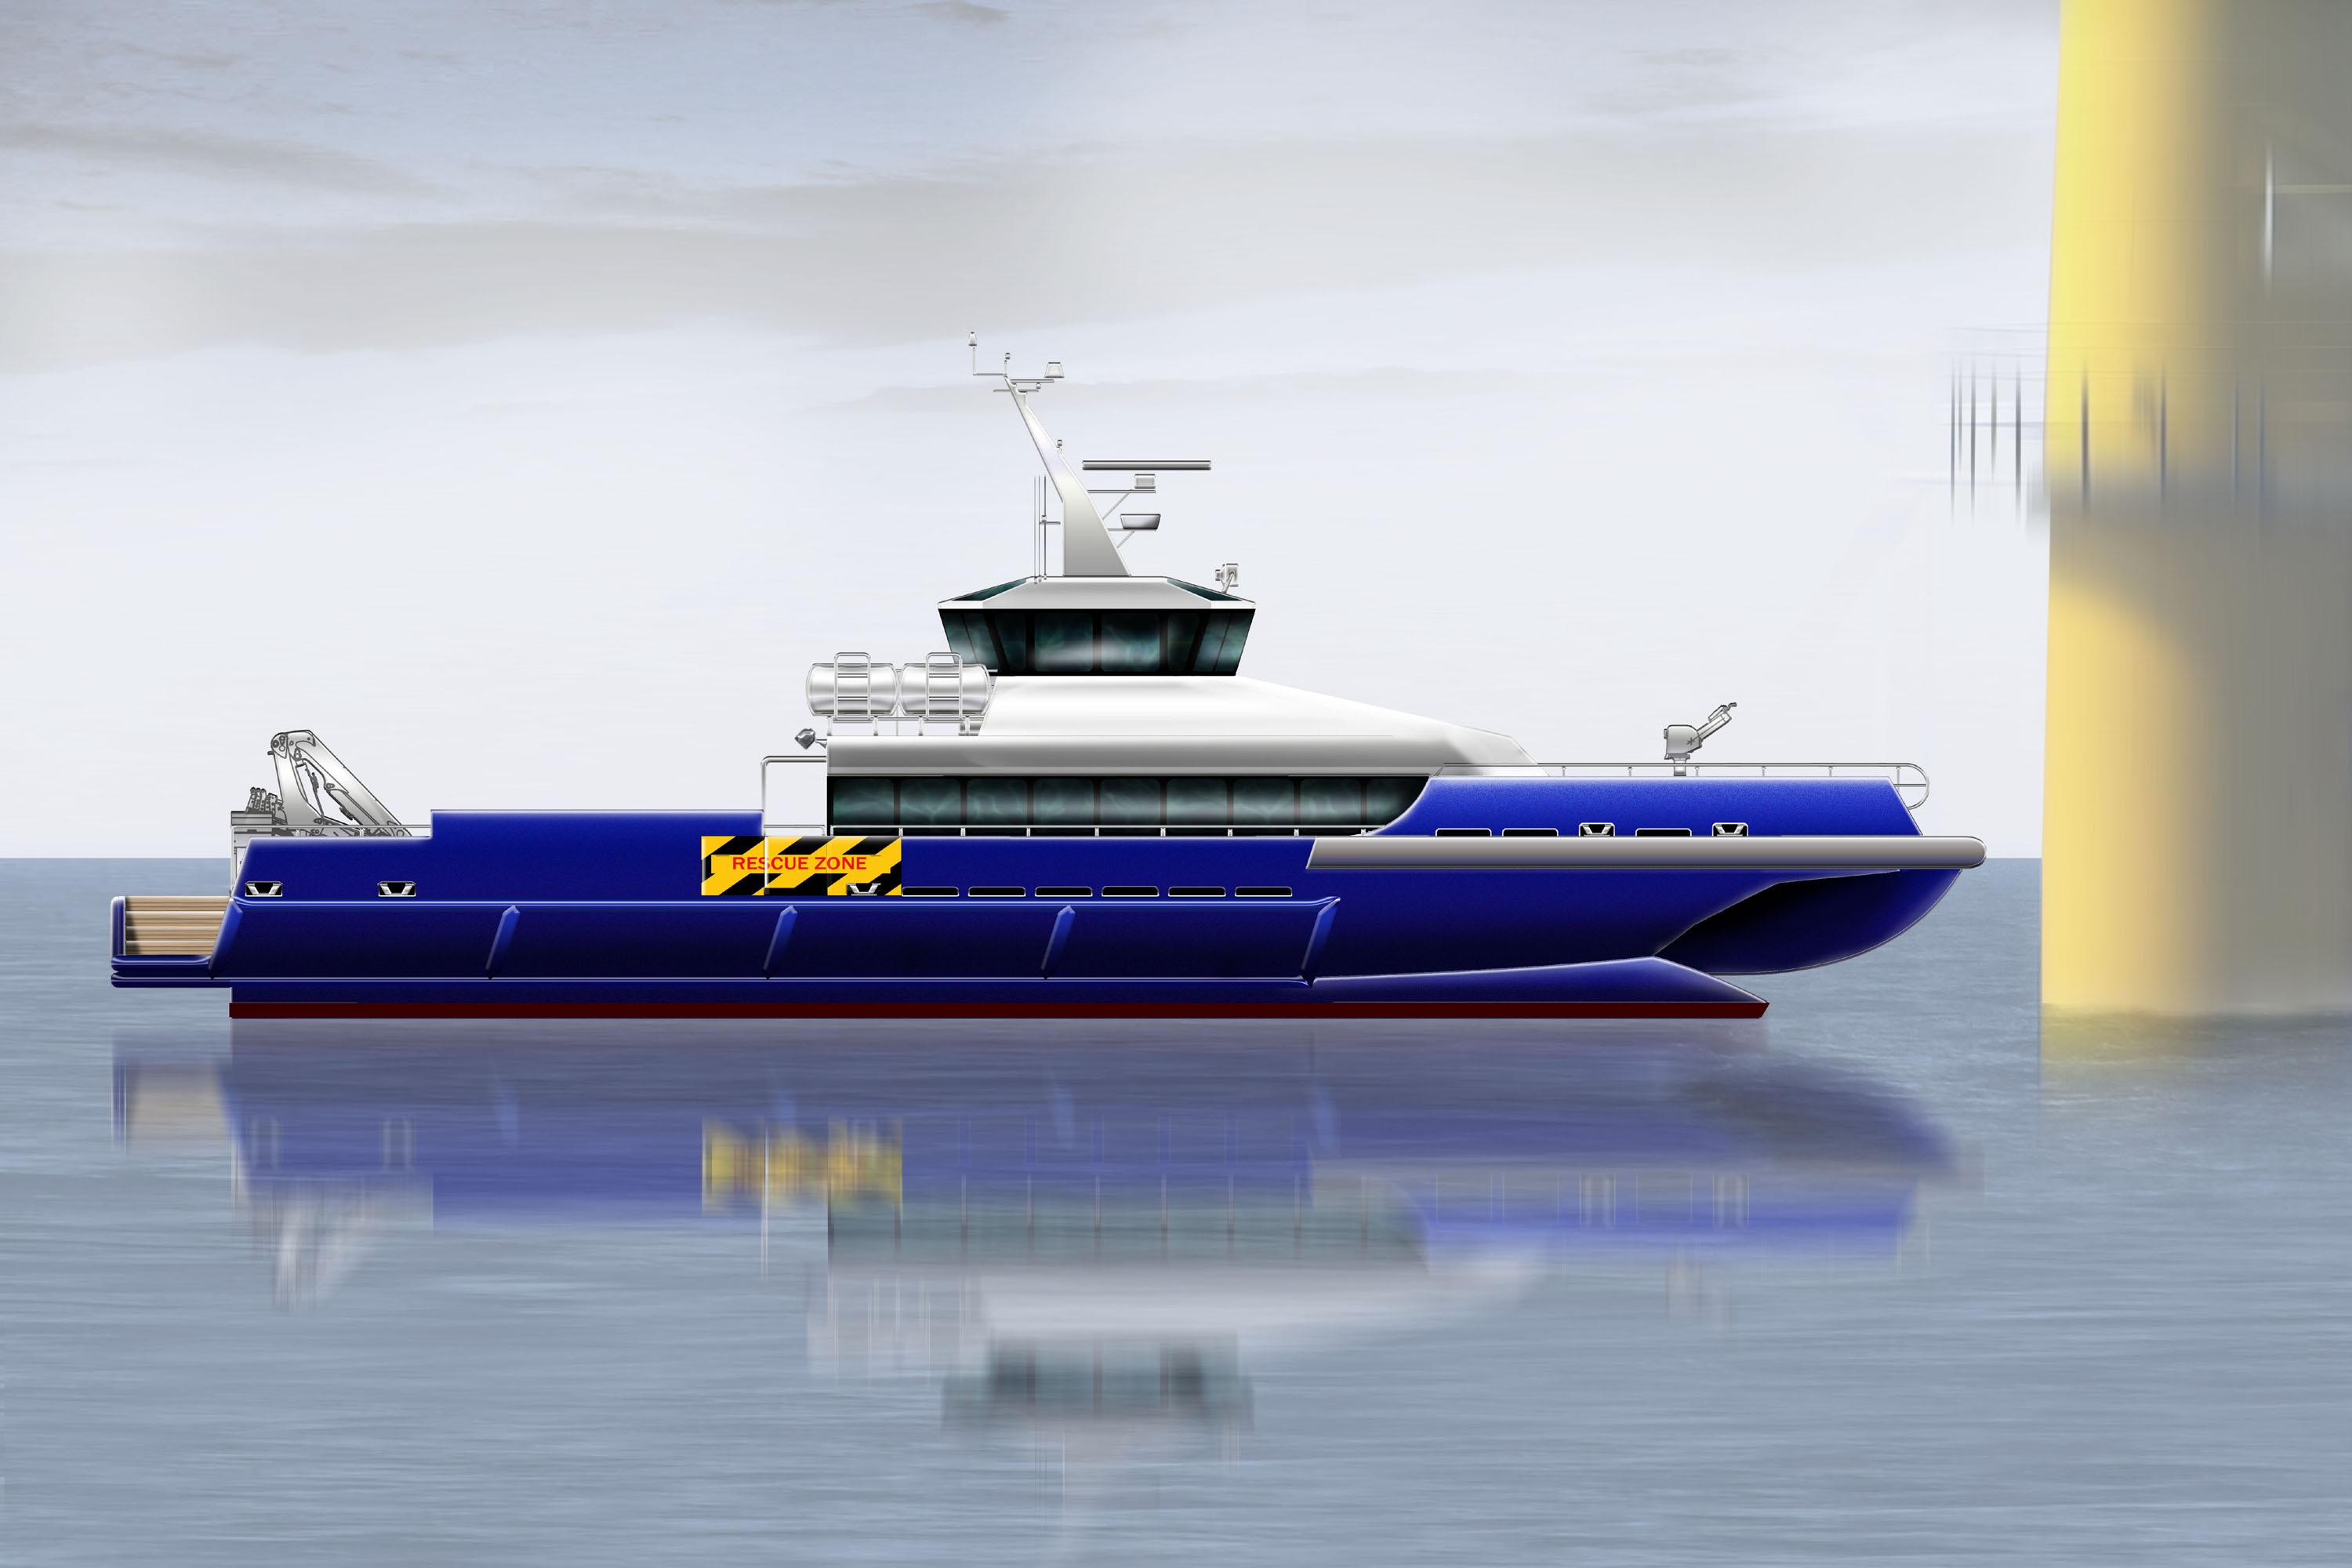 COMMERCIAL NEWS — Wave-piercing crewboat